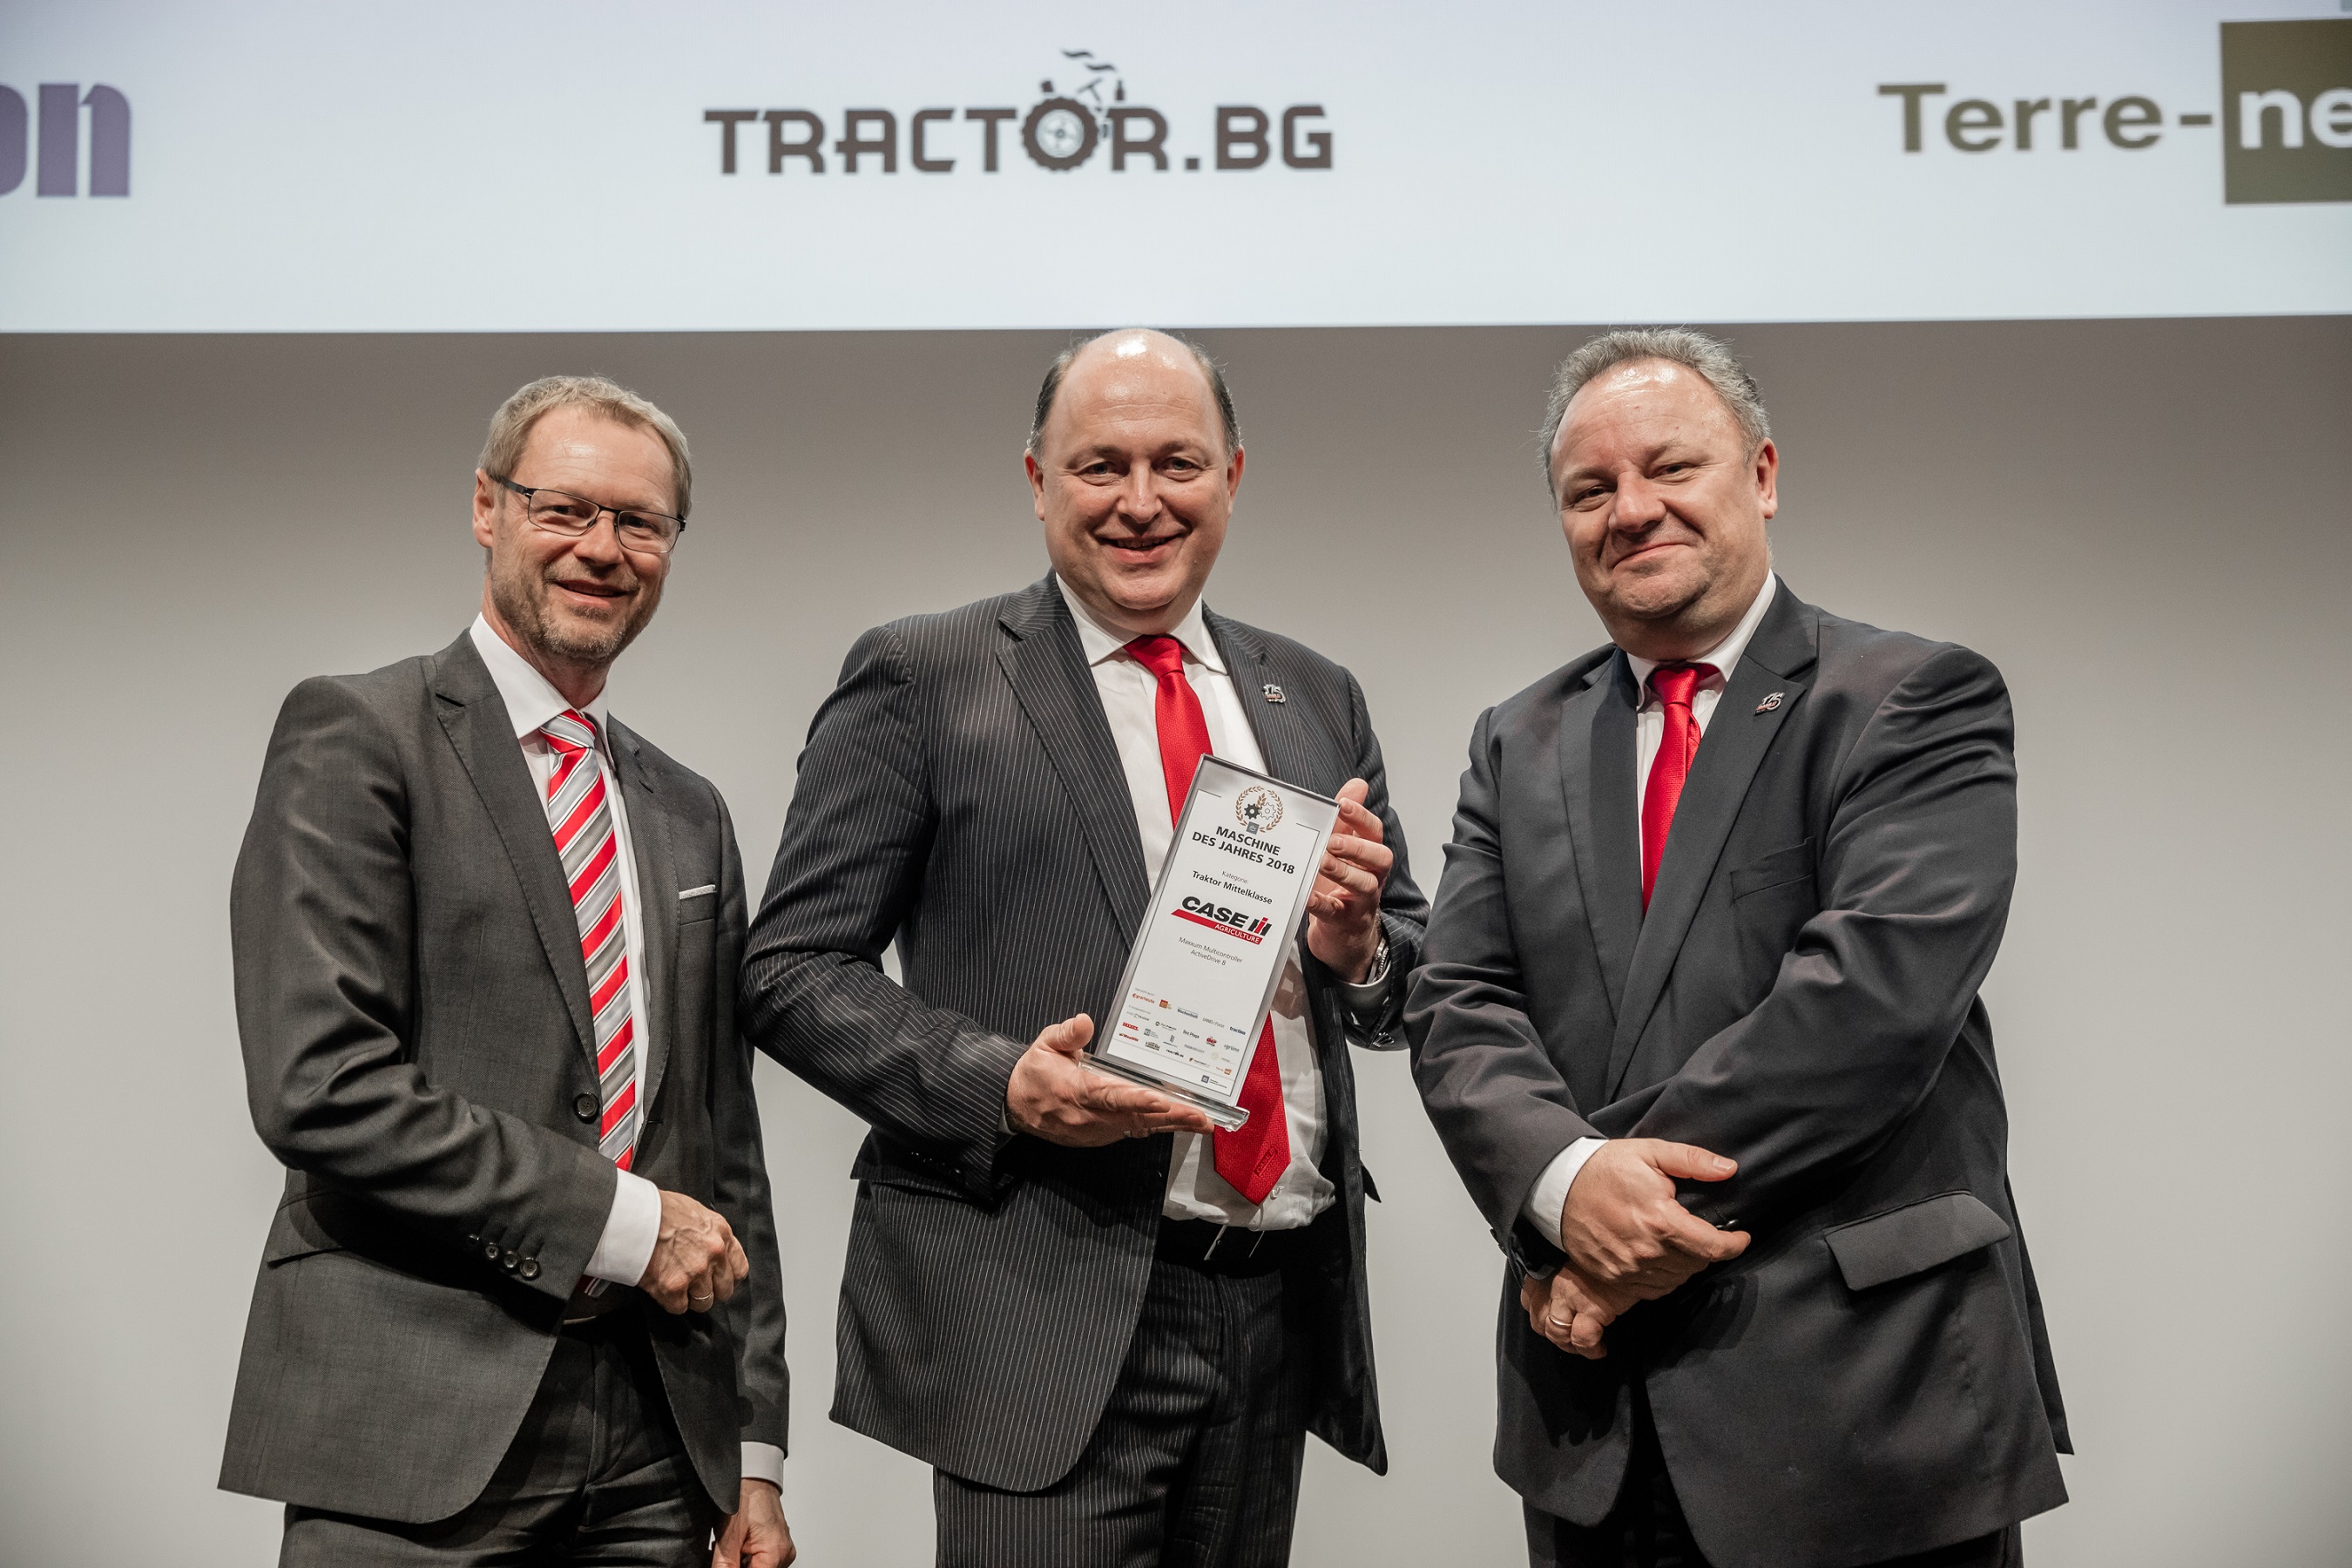 CASE IH WINS MACHINE OF THE YEAR 2018 TITLE WITH NEW MAXXUM MULTICONTROLLER WITH ACTIVEDRIVE 8 TRANSMISSION